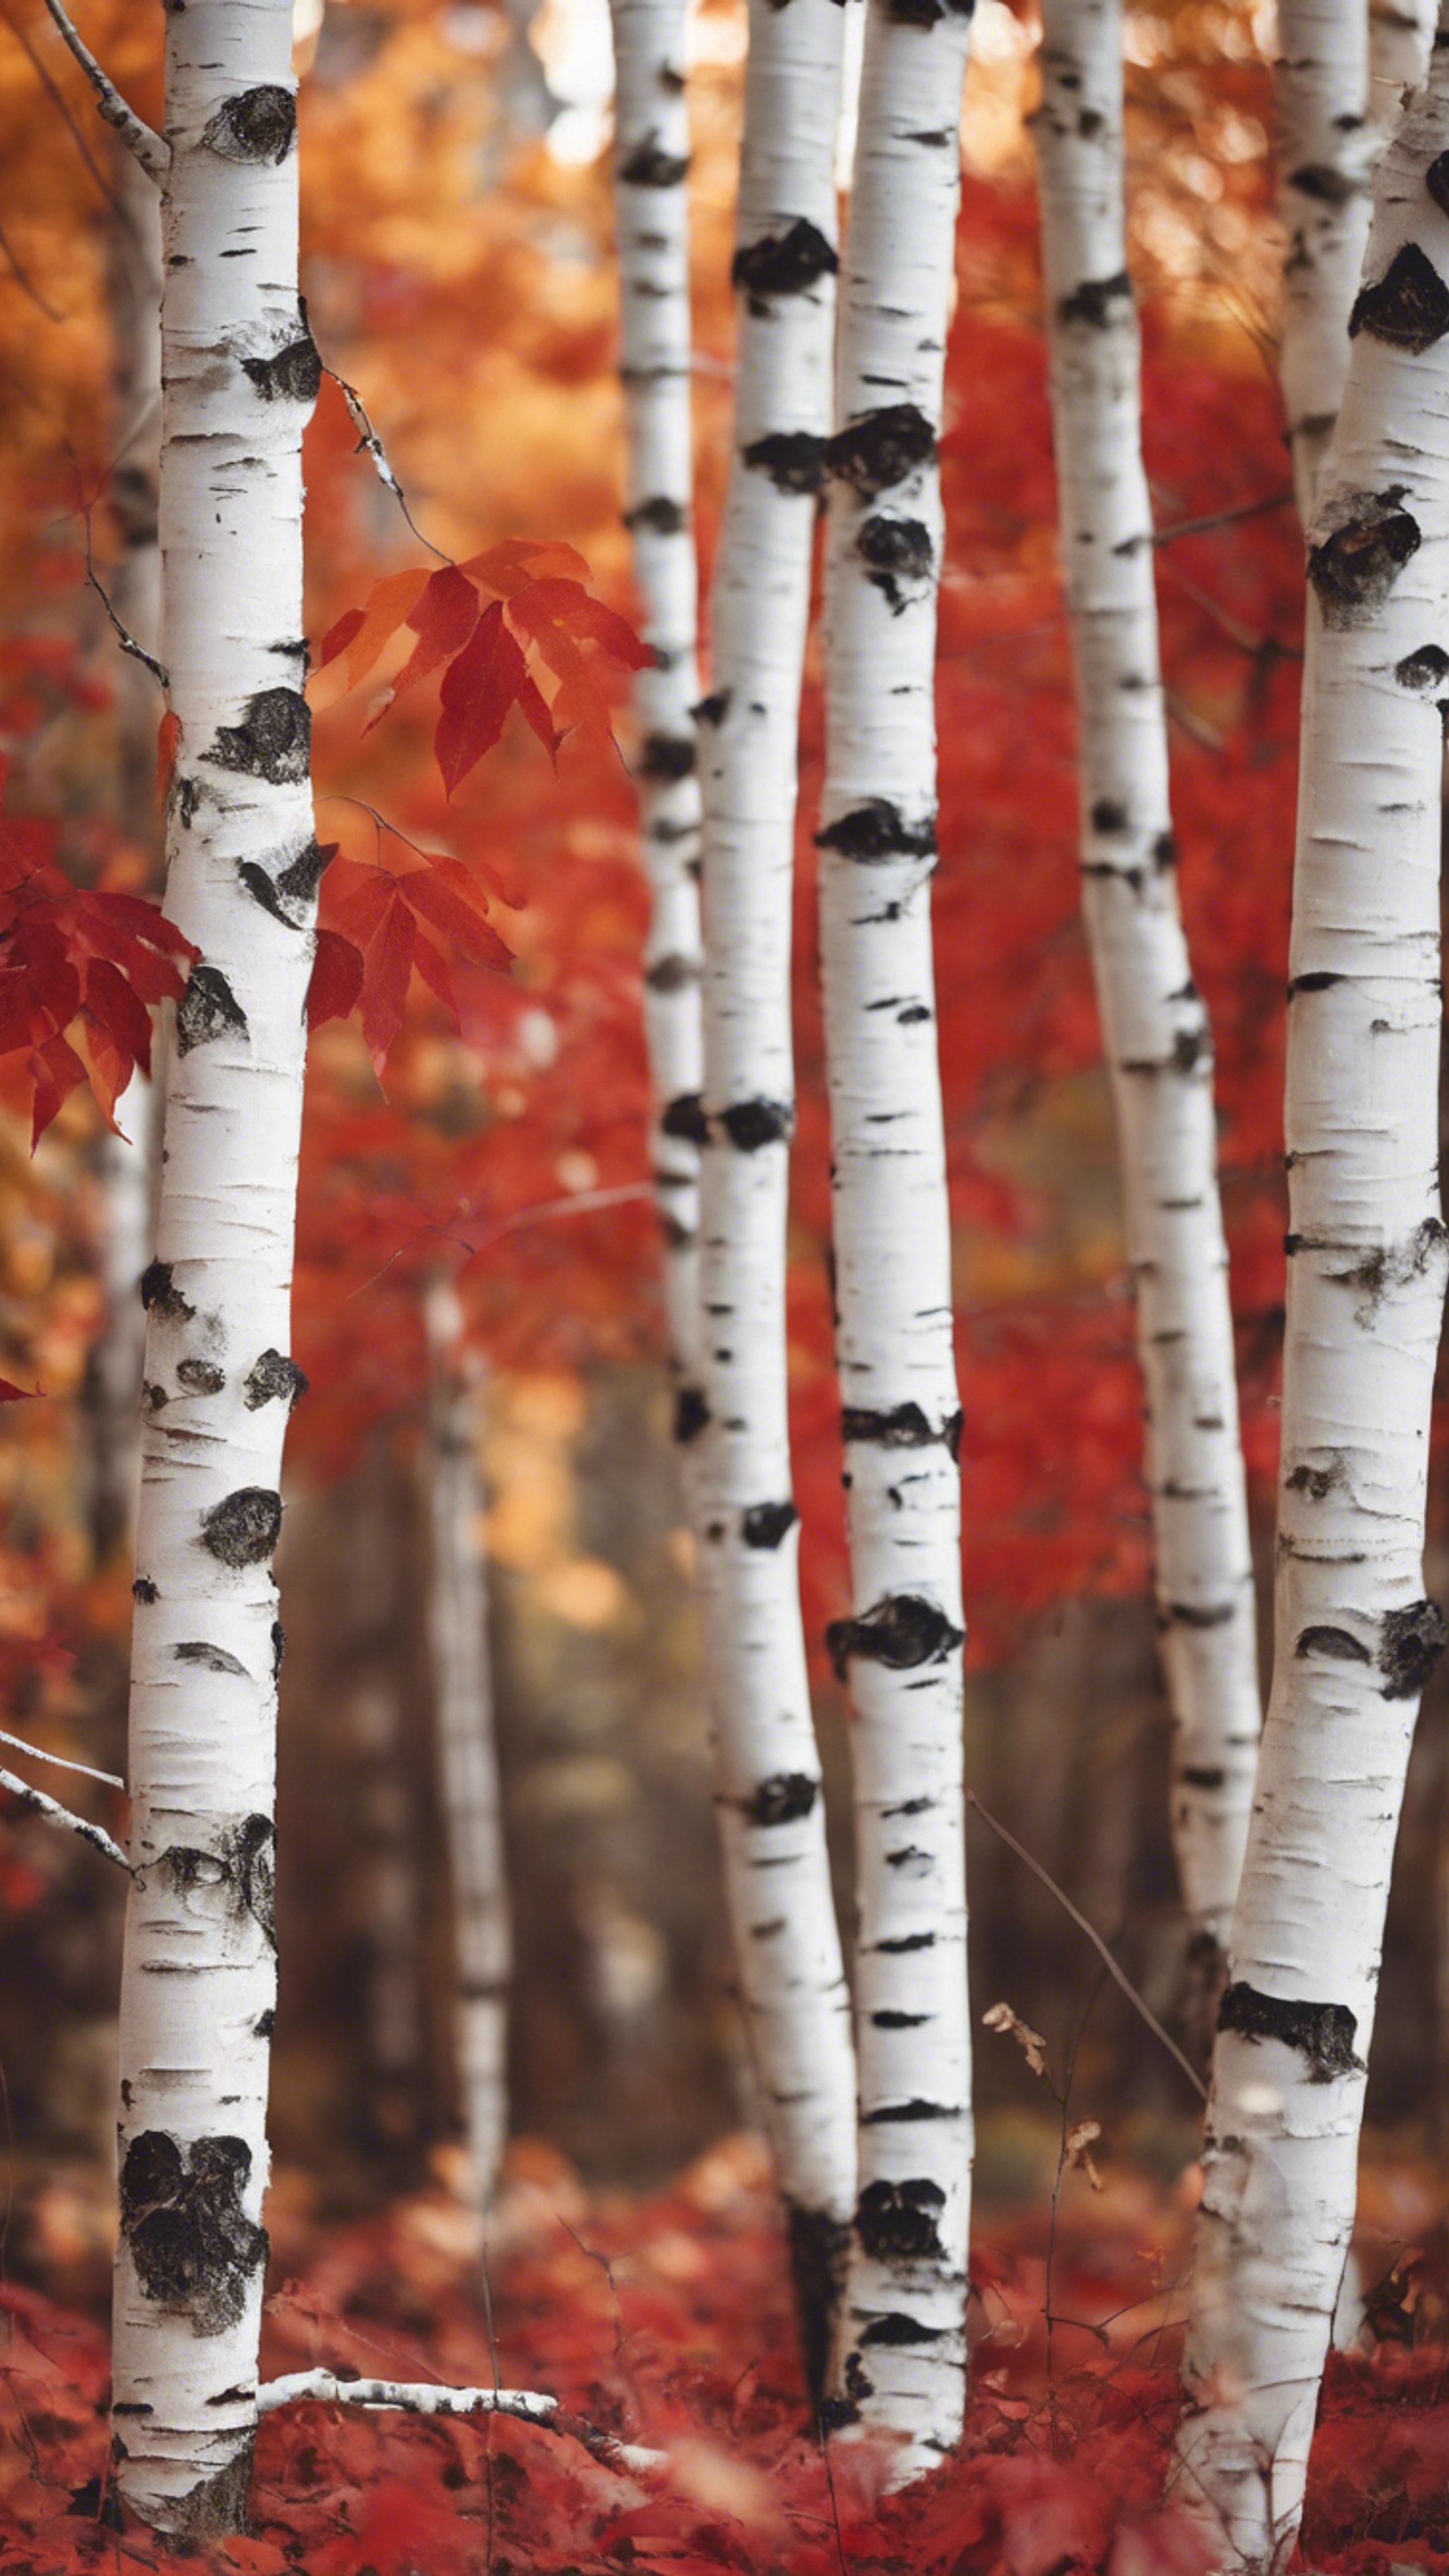 Fall scenes with white birches decked with autumn red foliage. Валлпапер[2b263cdc55c54552b5f9]